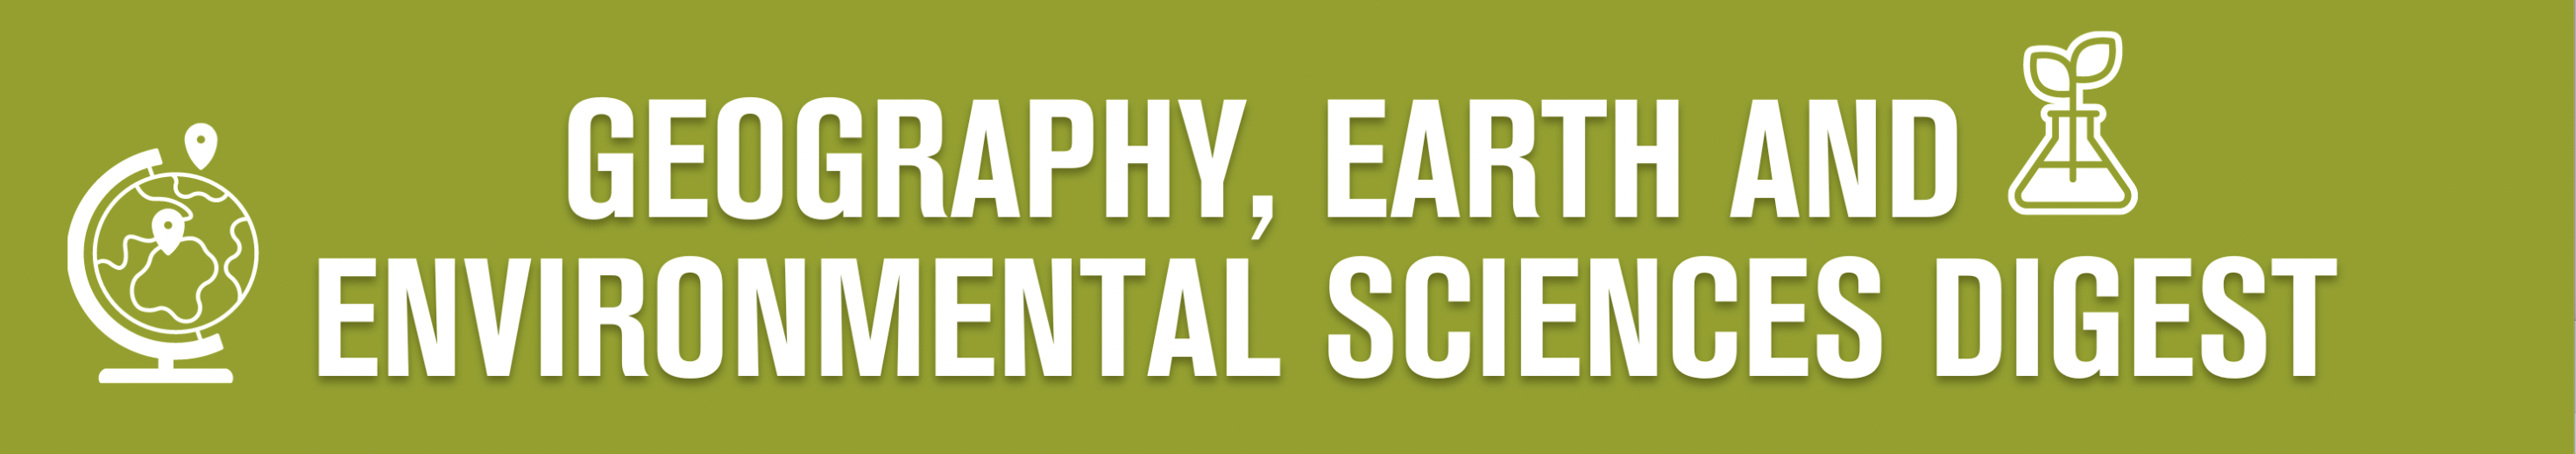 Geography, Earth and Enviromental Sciences Digest